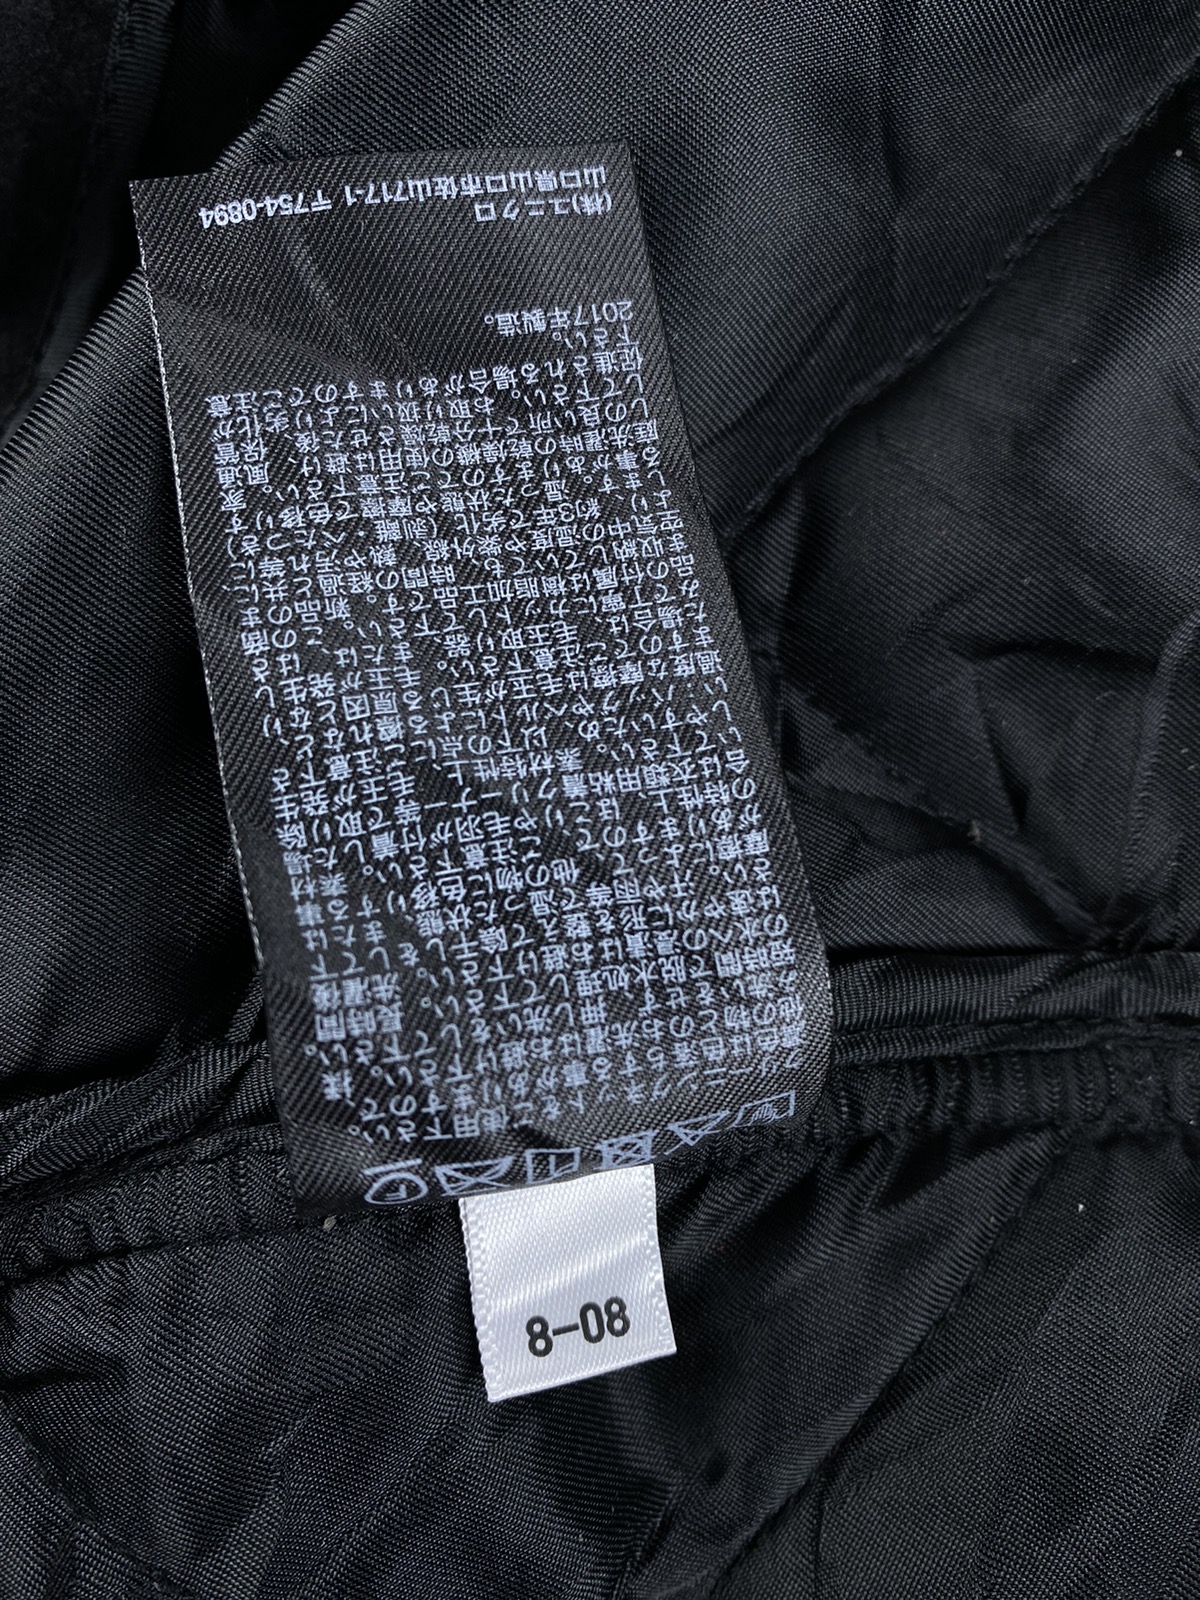 Uniqlo - J. W. Anderson X Uniqlo Quilted Double Pocket Wool Jacket - 6